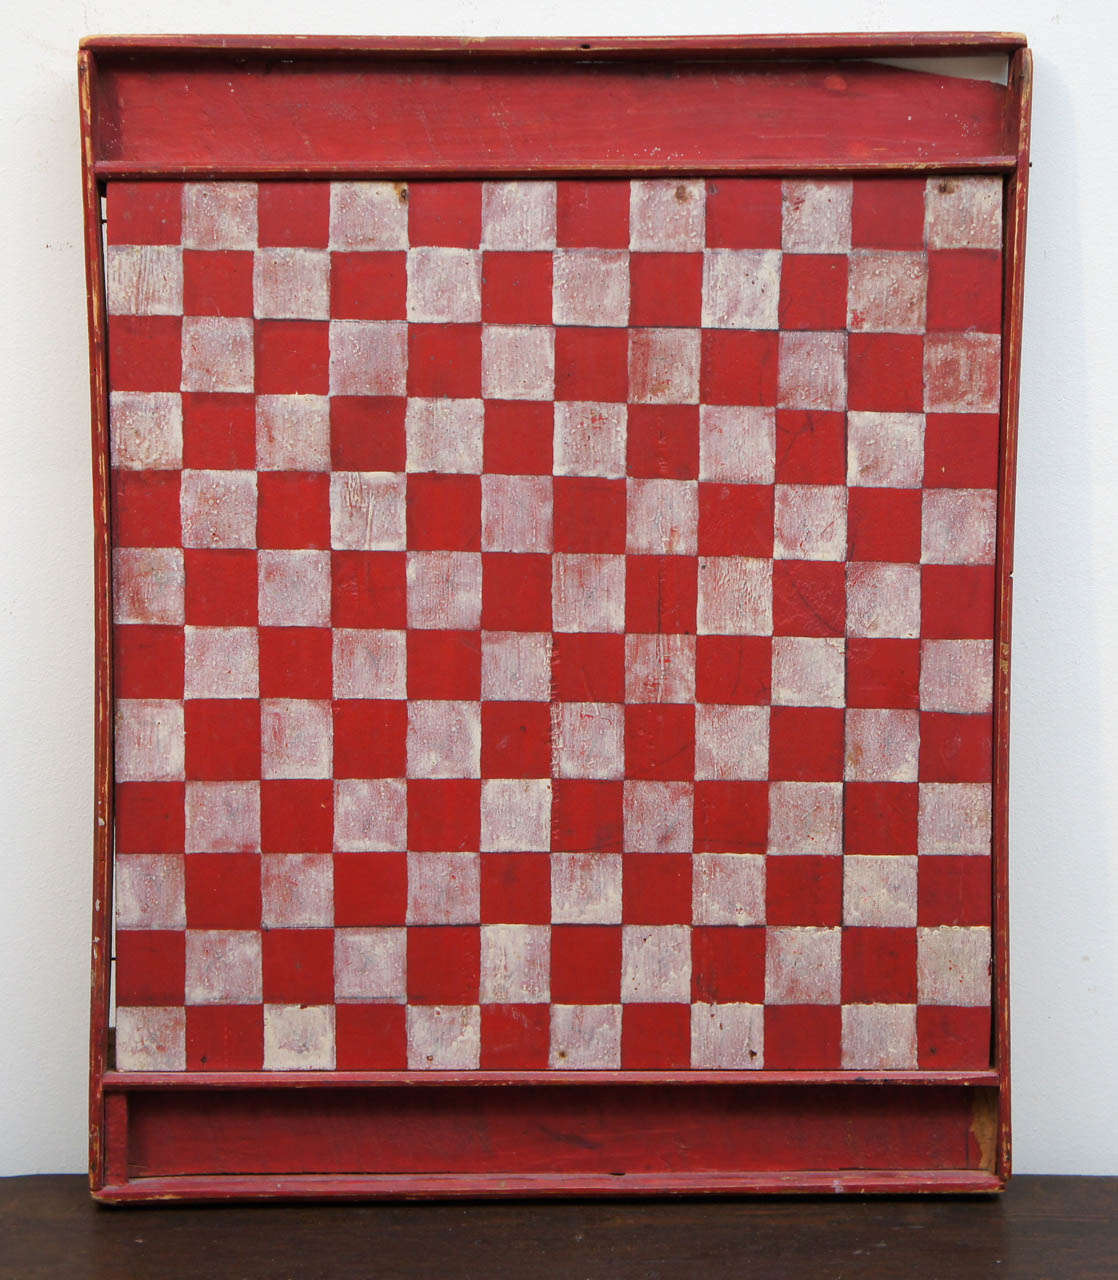 Draughts is the Canadian version of checkers and has more squares than the American game. The coloration is terrific and this piece has a slot on each end to hold the pieces. It is nicely worn and added to a collection or hanging by itself would be